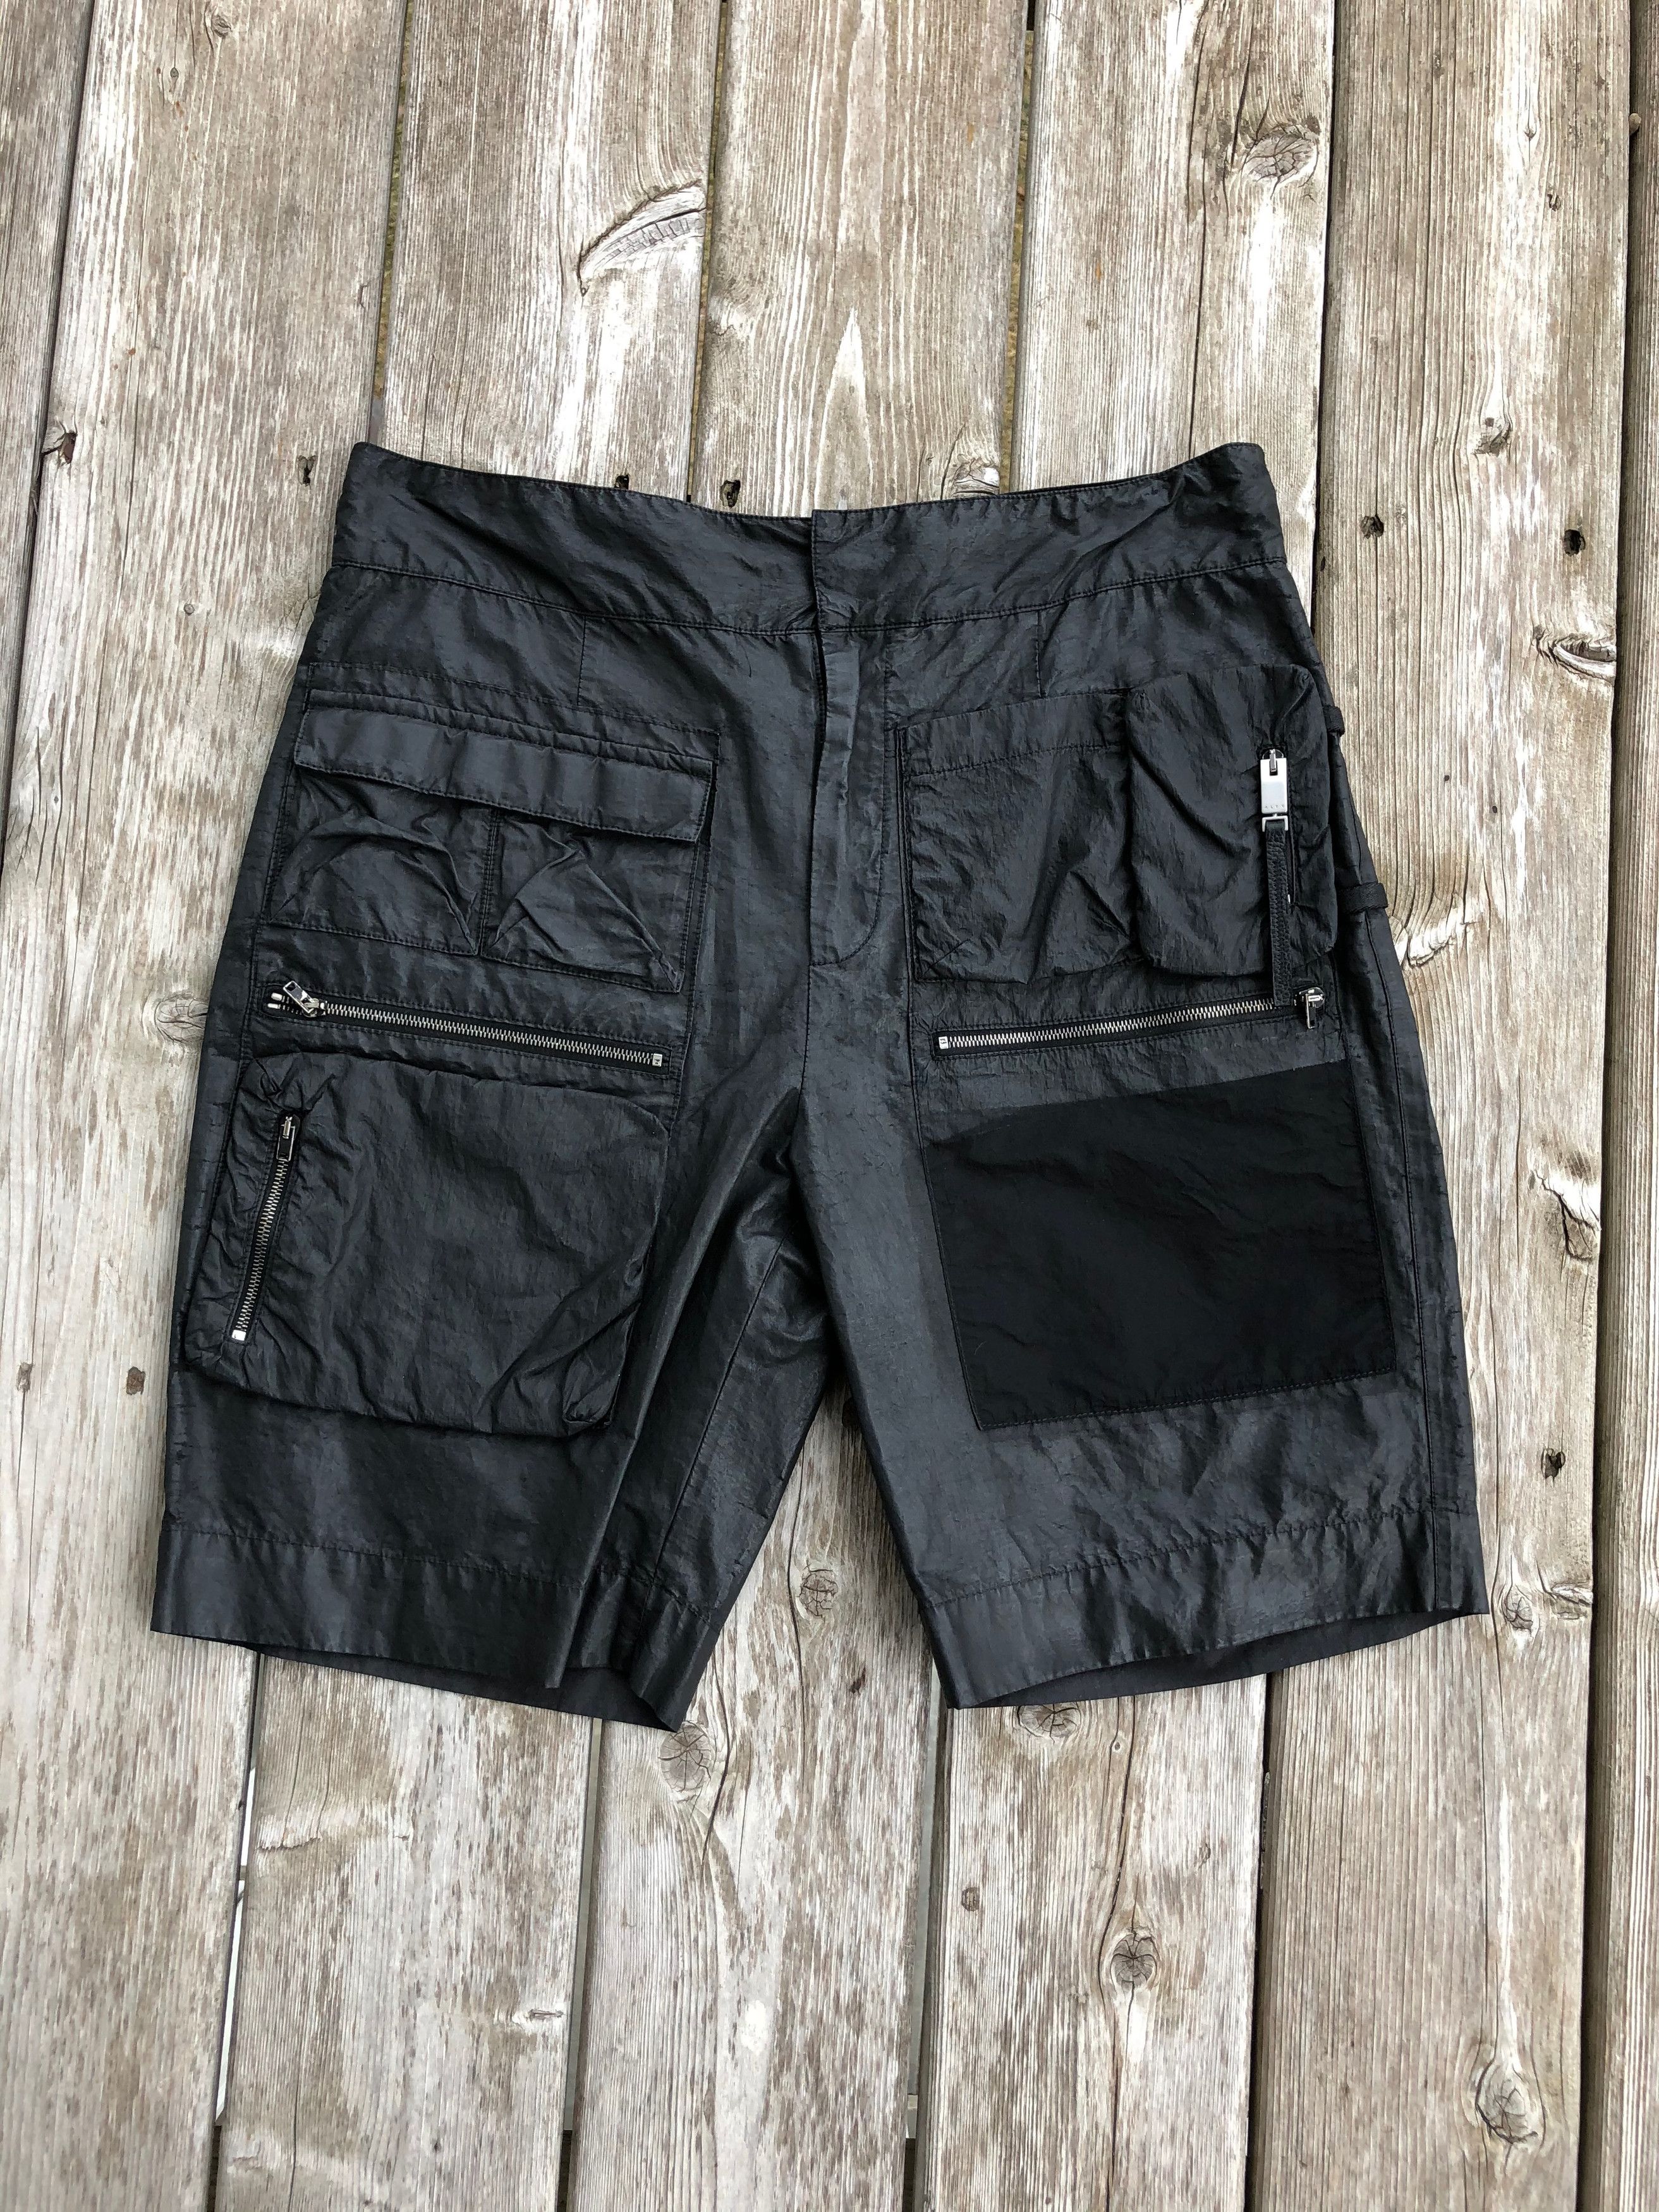 Alyx 1017 Alyx 9SM Tactical Shorts in Black | Grailed